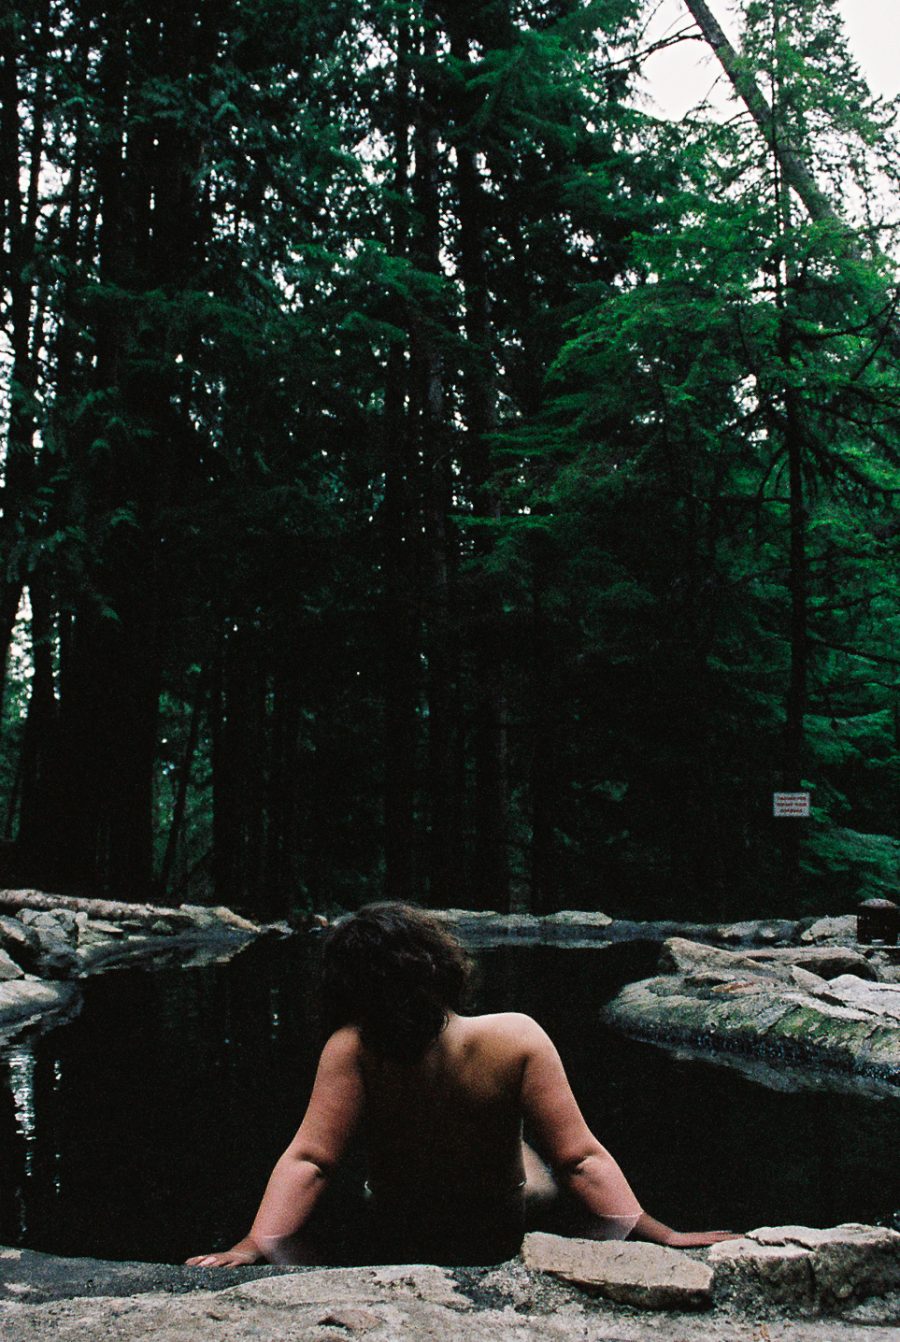 A person from behind as they relax in a hot spring.